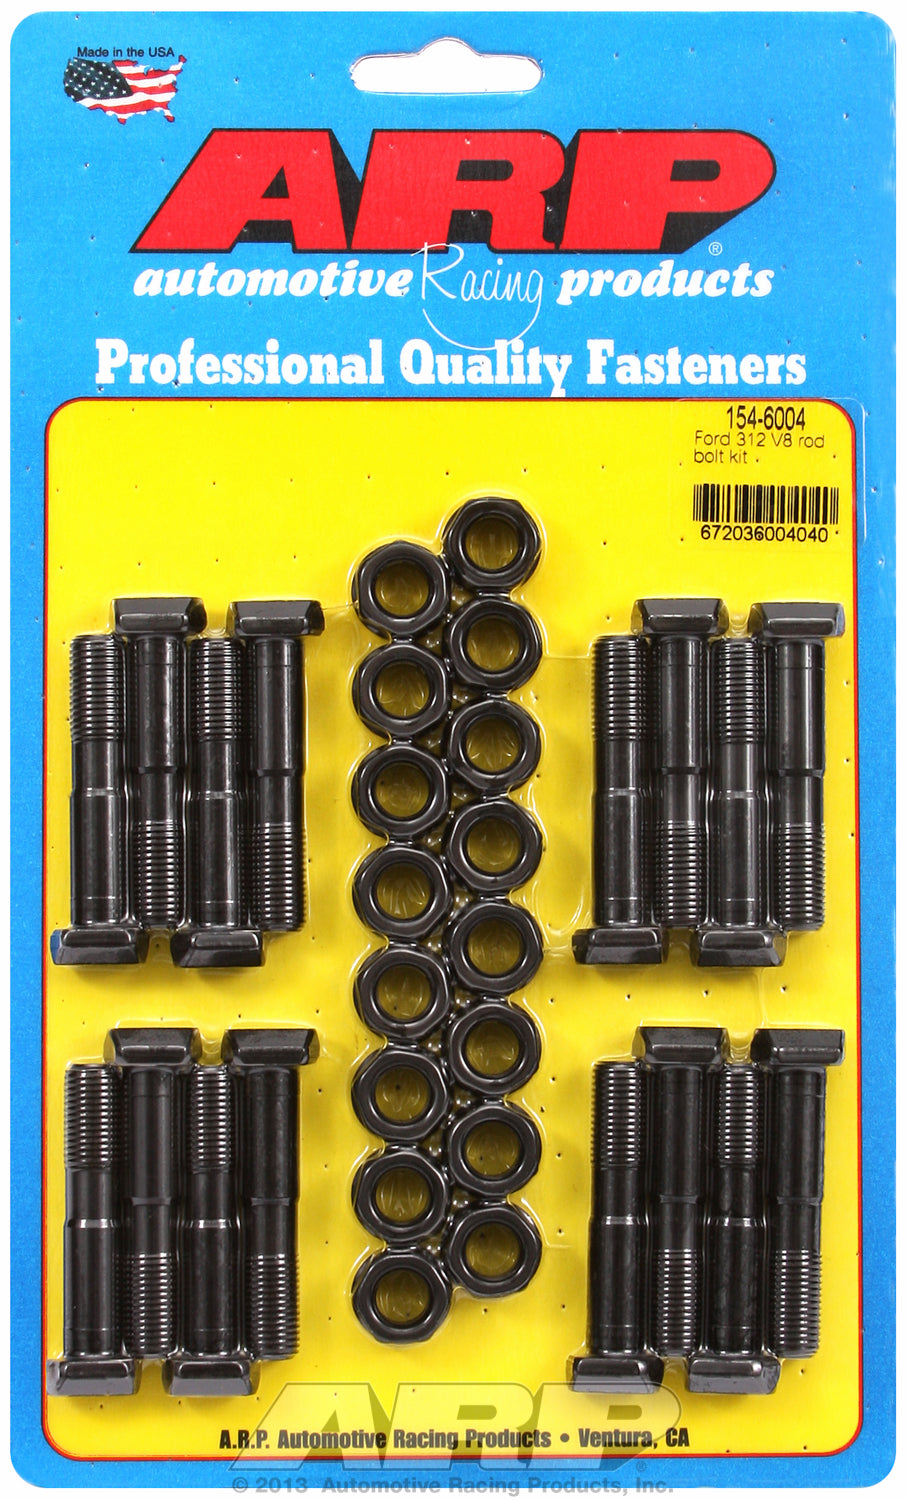 Hi-Perf 8740 Complete Rod Bolt Kit for Ford 239-256-272-292 Y block (rod marked ECZ)